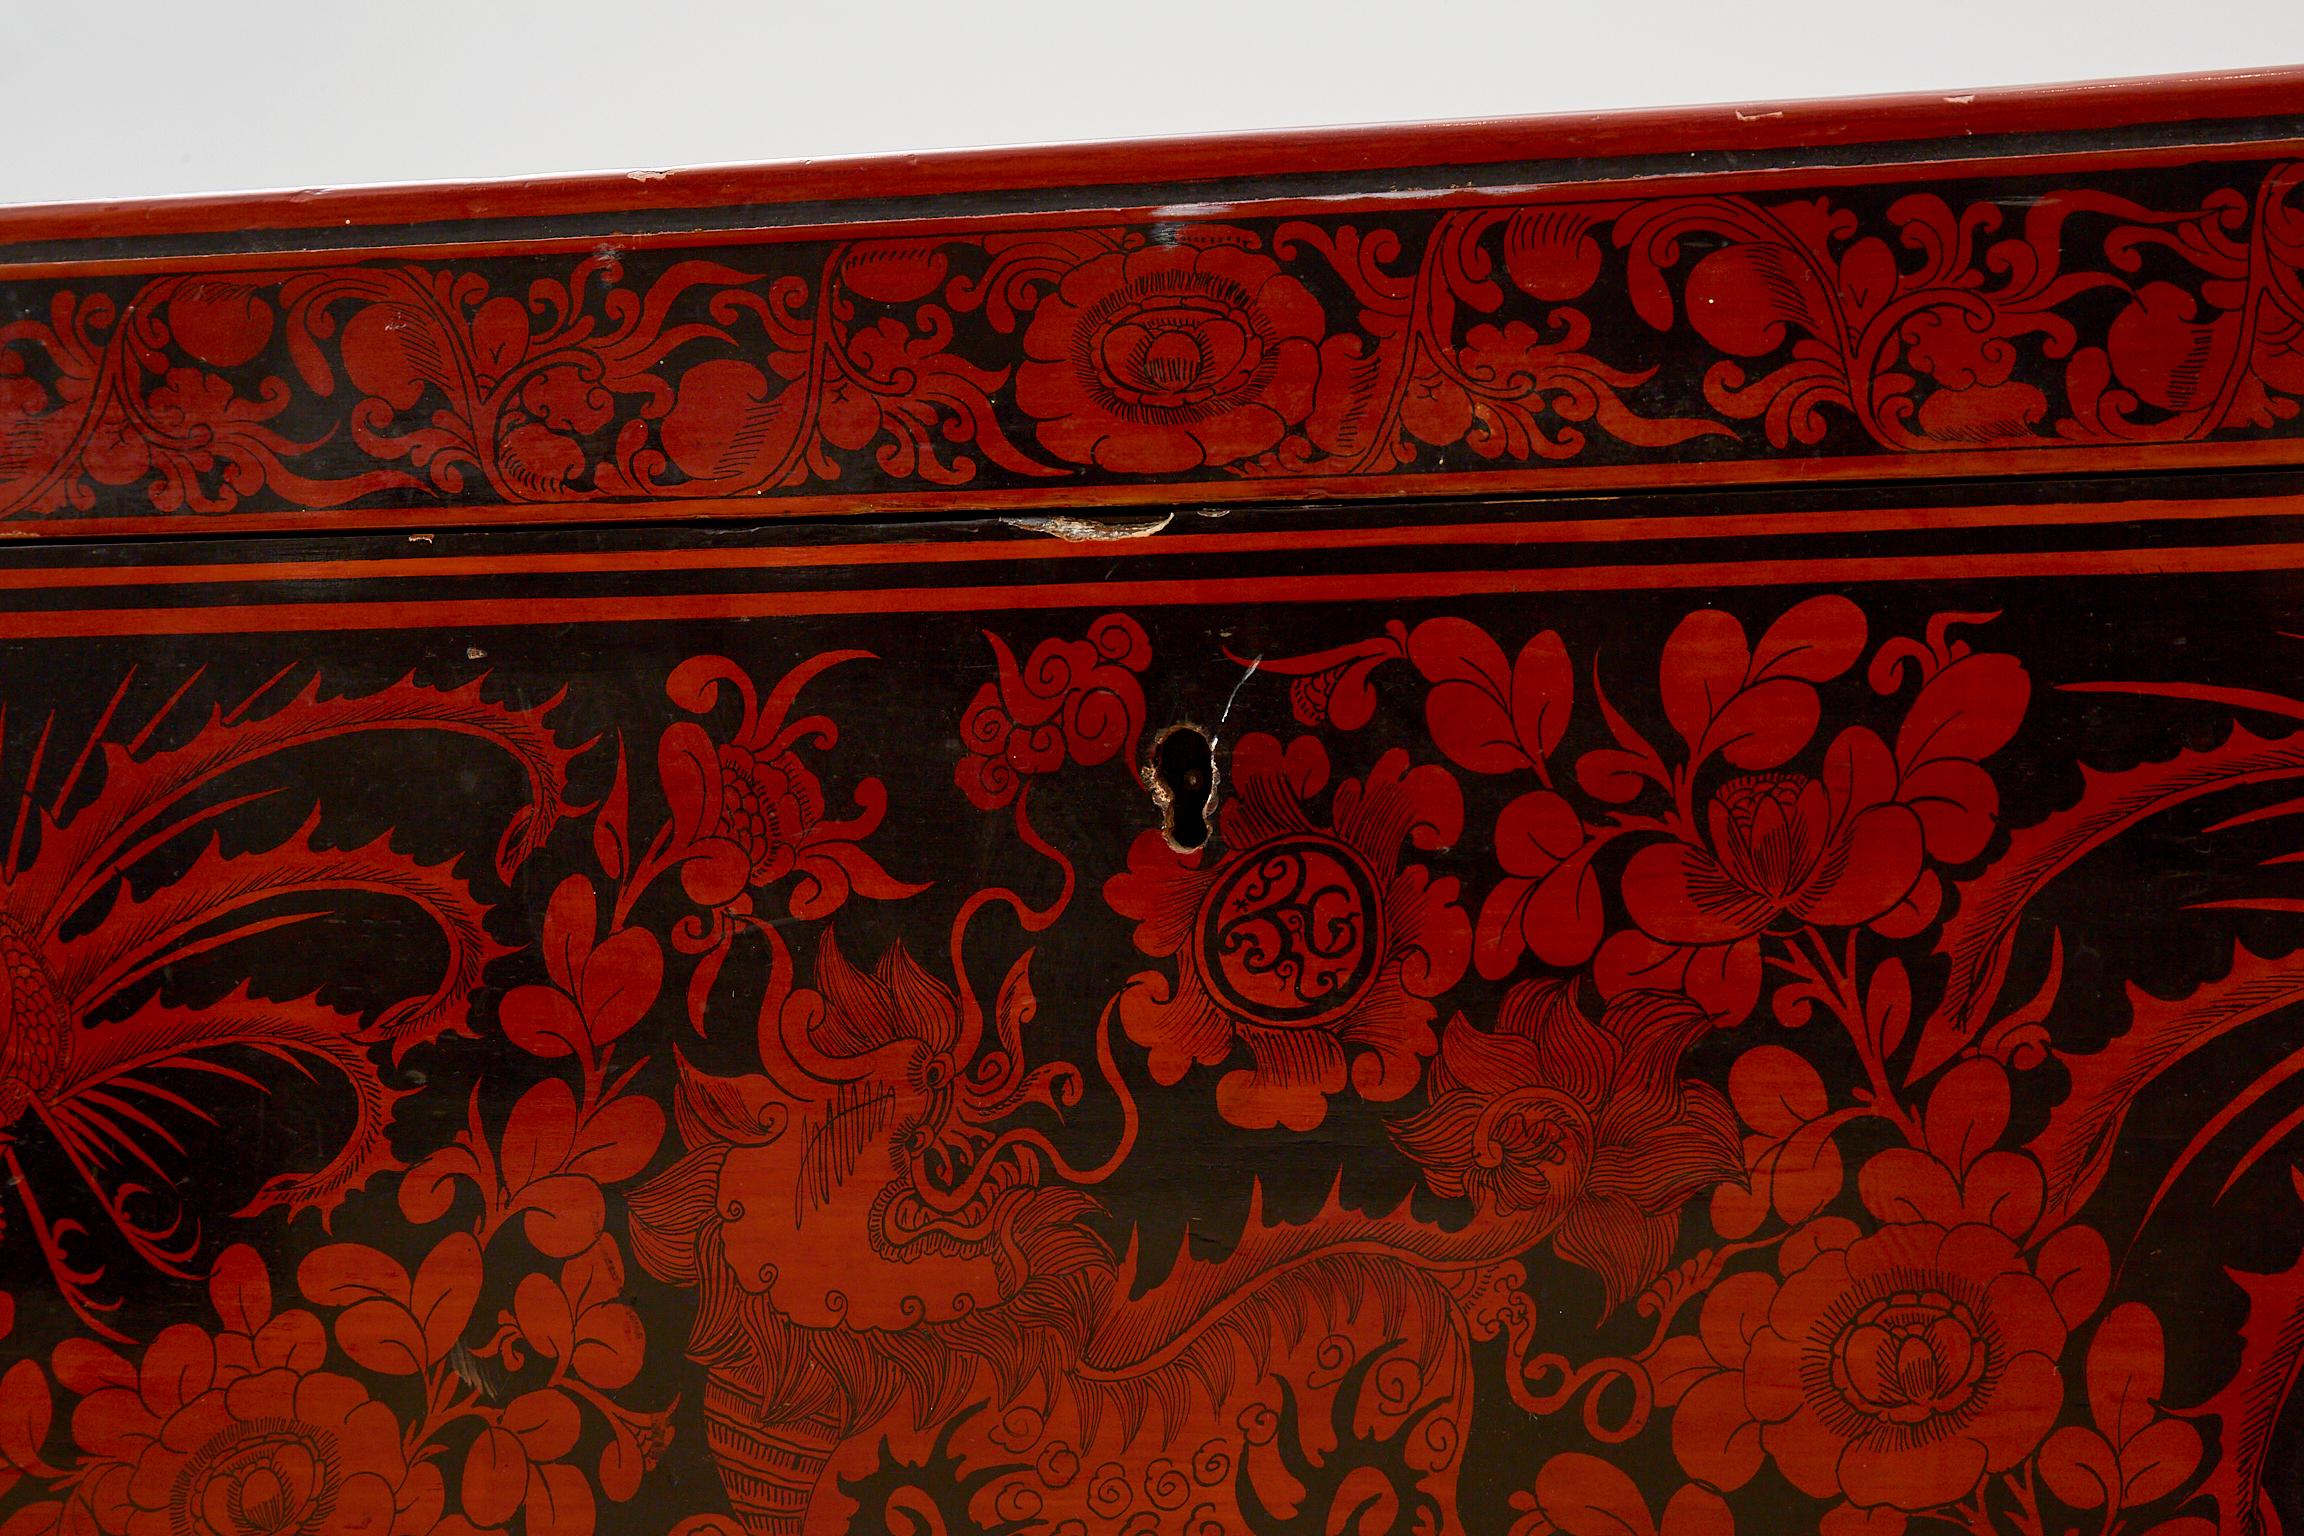 Wood Red Lacquered Painted Chinese Trunk with Compartments and Counters Early 20th C.